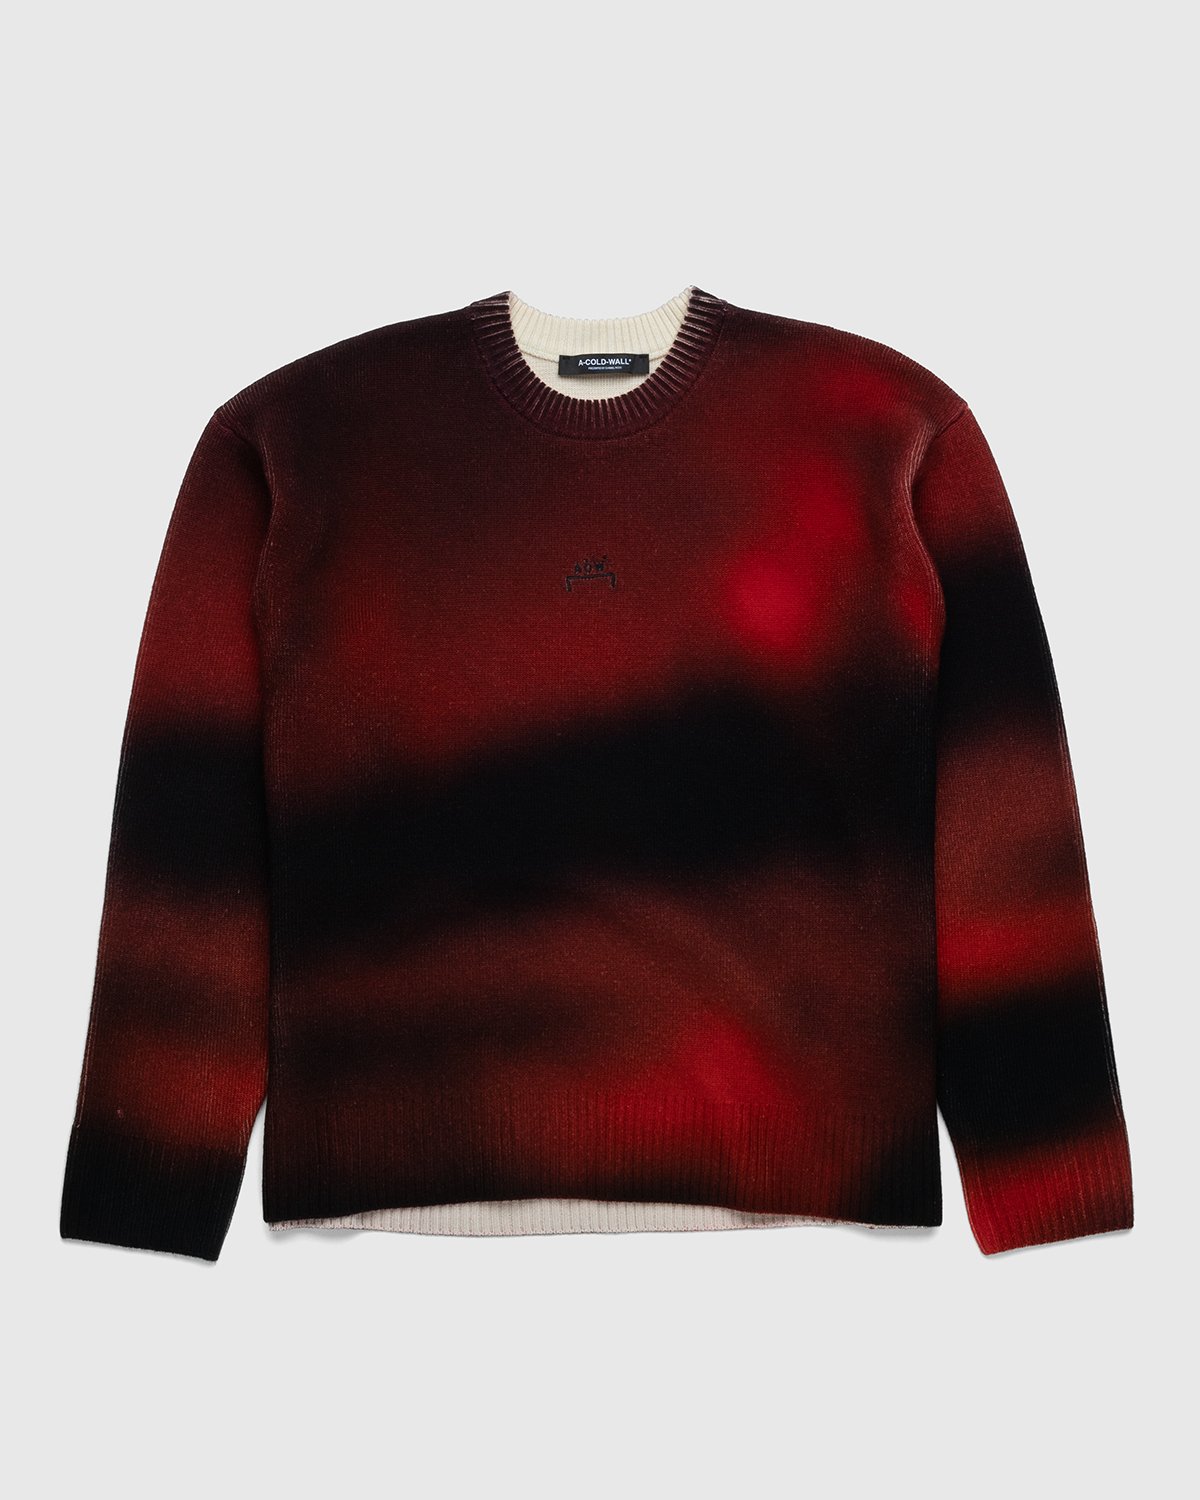 A-Cold-Wall* - Digital Print Knit Red - Clothing - Red - Image 1